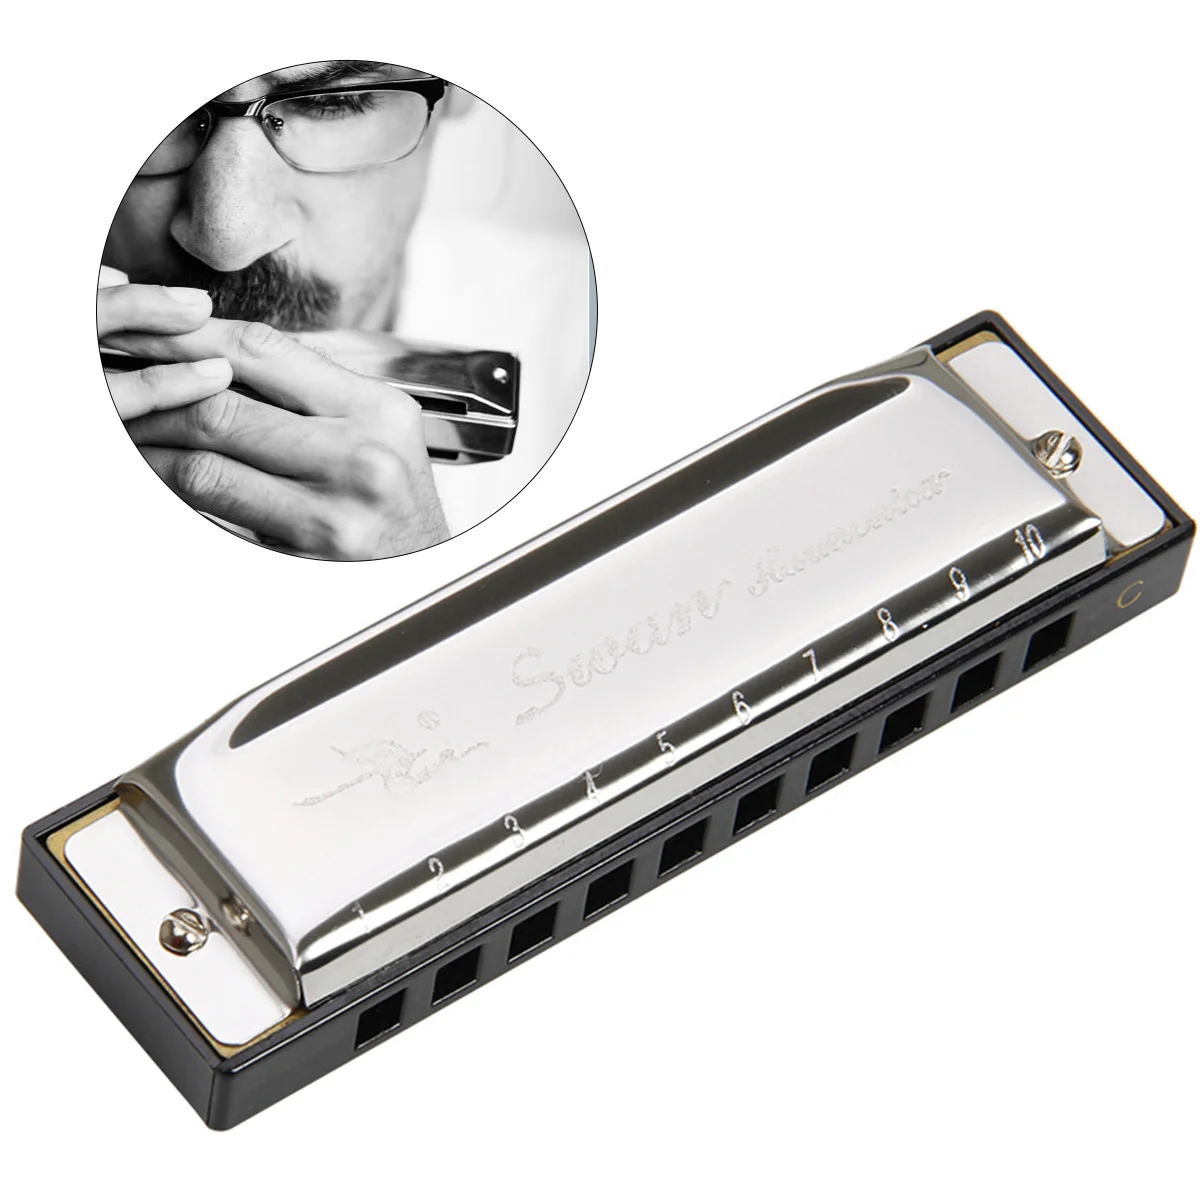 

Swan Harmonica Stainless Steel Toys 10 Holes Musical Instruments 20 Tones Educational Toys for Beginners Kids Party Holidays (